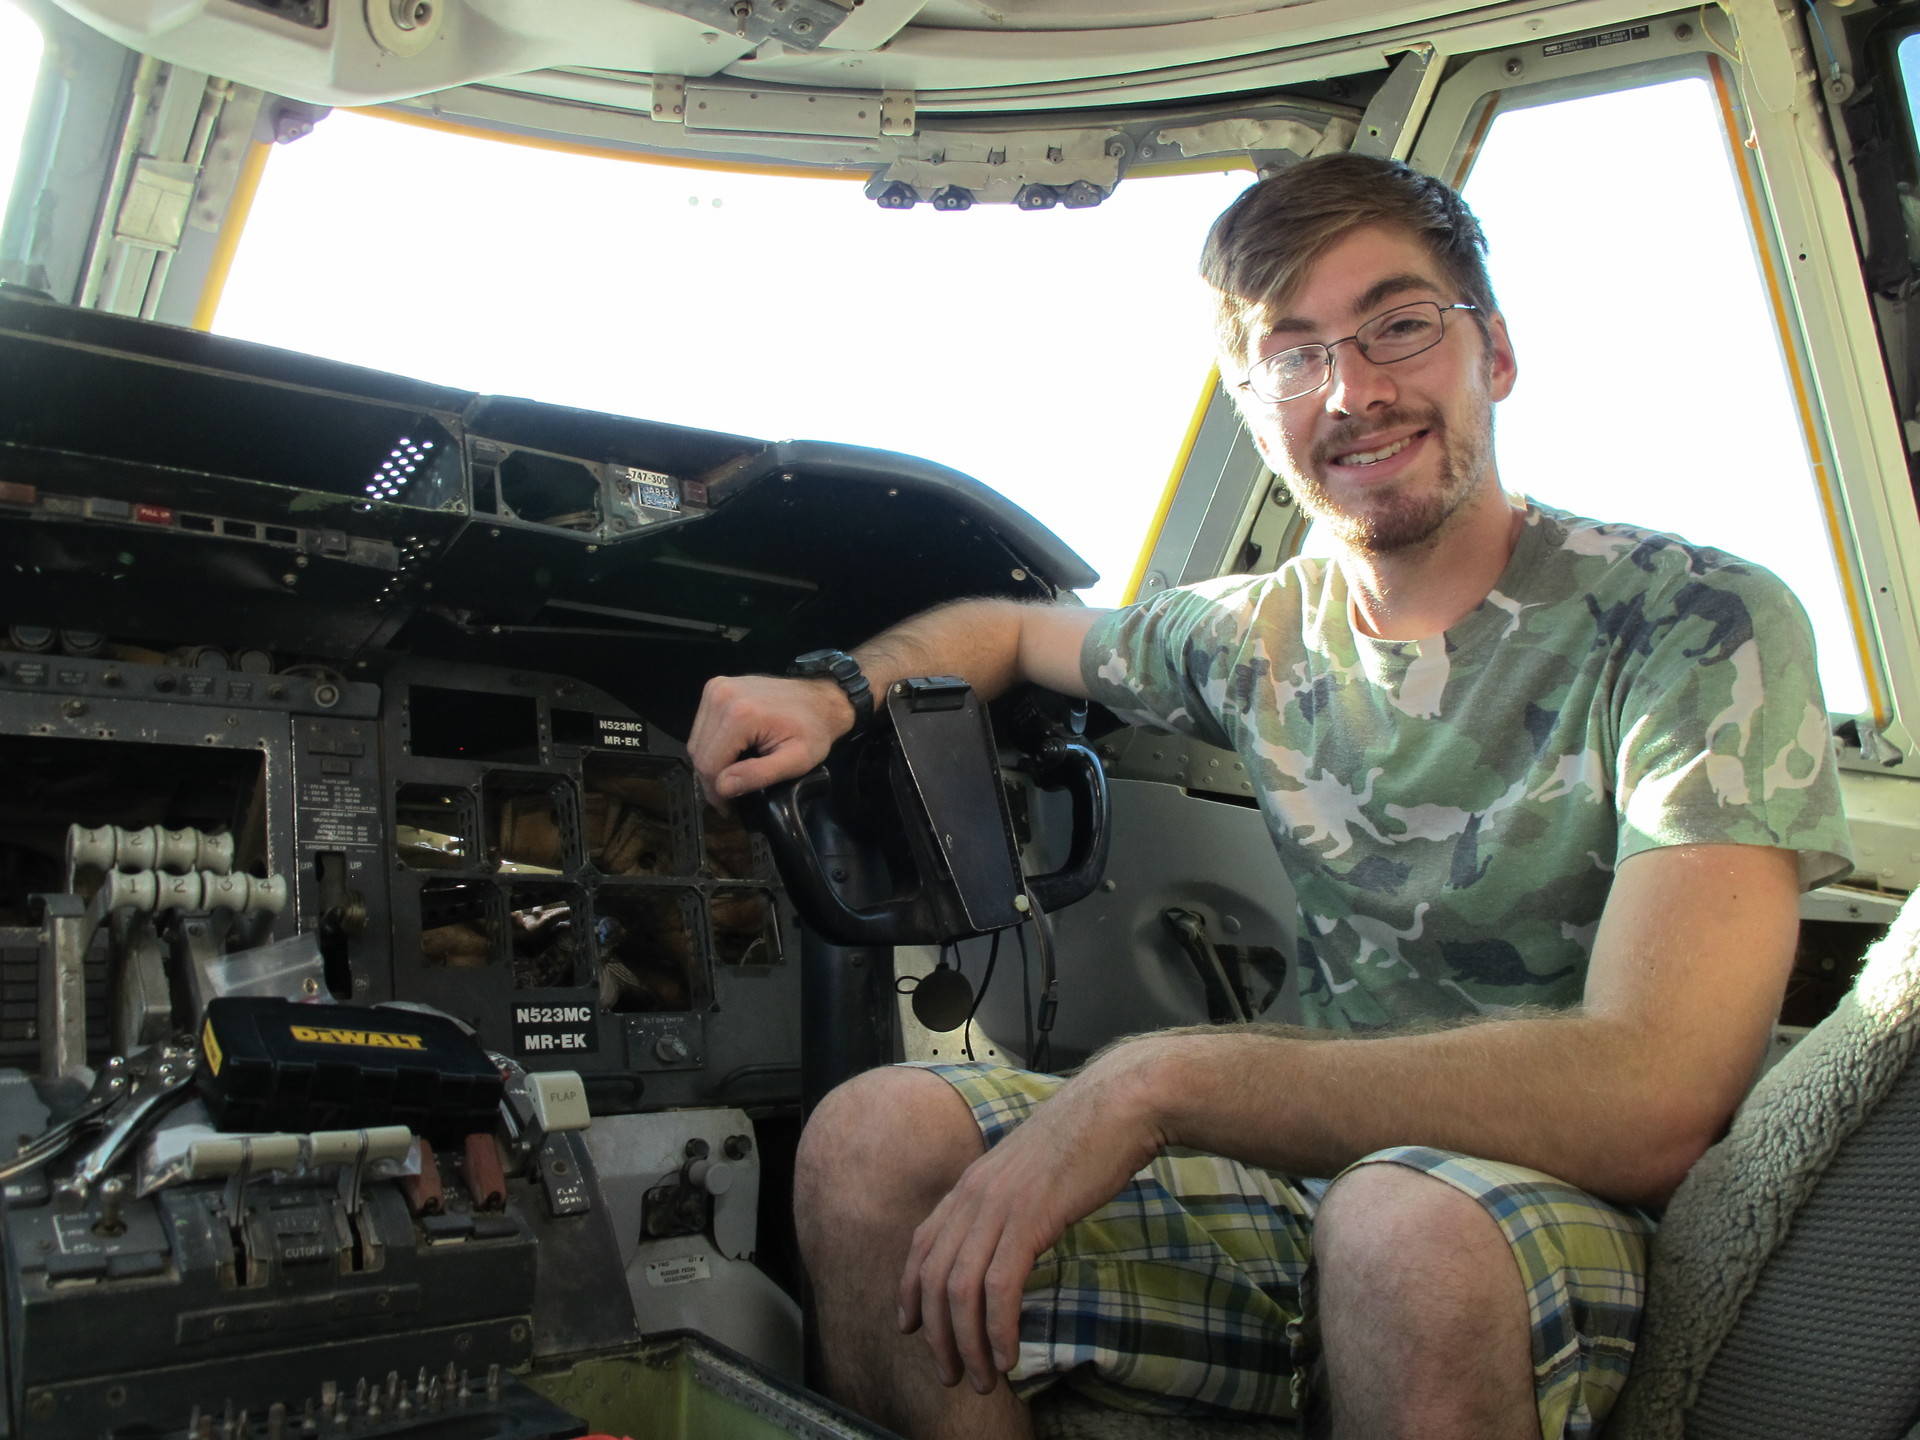 Volunteer Nick Avila of San Francisco sits in the 747 cockpit that he's helping to fix up for Burning Man. Susan Valot/KQED